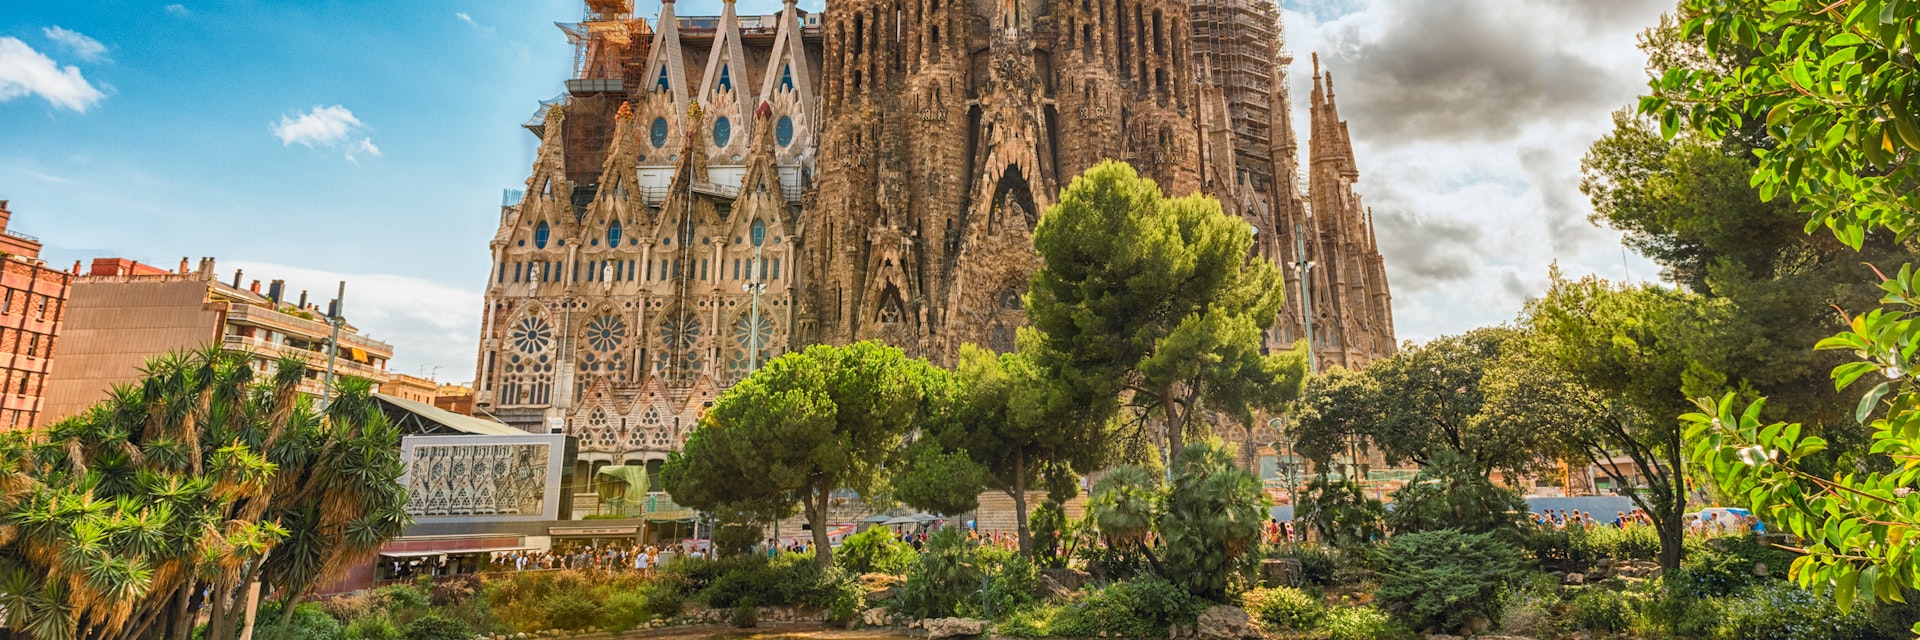 BARCELONA - AUGUST 9: View of the Sagrada Familia, iconic landmark in Barcelona, Catalonia, Spain, on August 9, 2017. Designed by Gaudi and estimated to be completed by 2028. Cranes digitally removed
756015418
antoni, antonio, architecture, art, barcelona, blue, building, catalan, catalonia, cathedral, church, city, construction, designed, editorial, europe, facade, familia, family, famous, gaudi, gothic, historical, history, la, landmark, modern, monument, pond, religion, sagrada, sky, spain, spanish, structure, summer, tall, temple, tourism, tower, town, travel